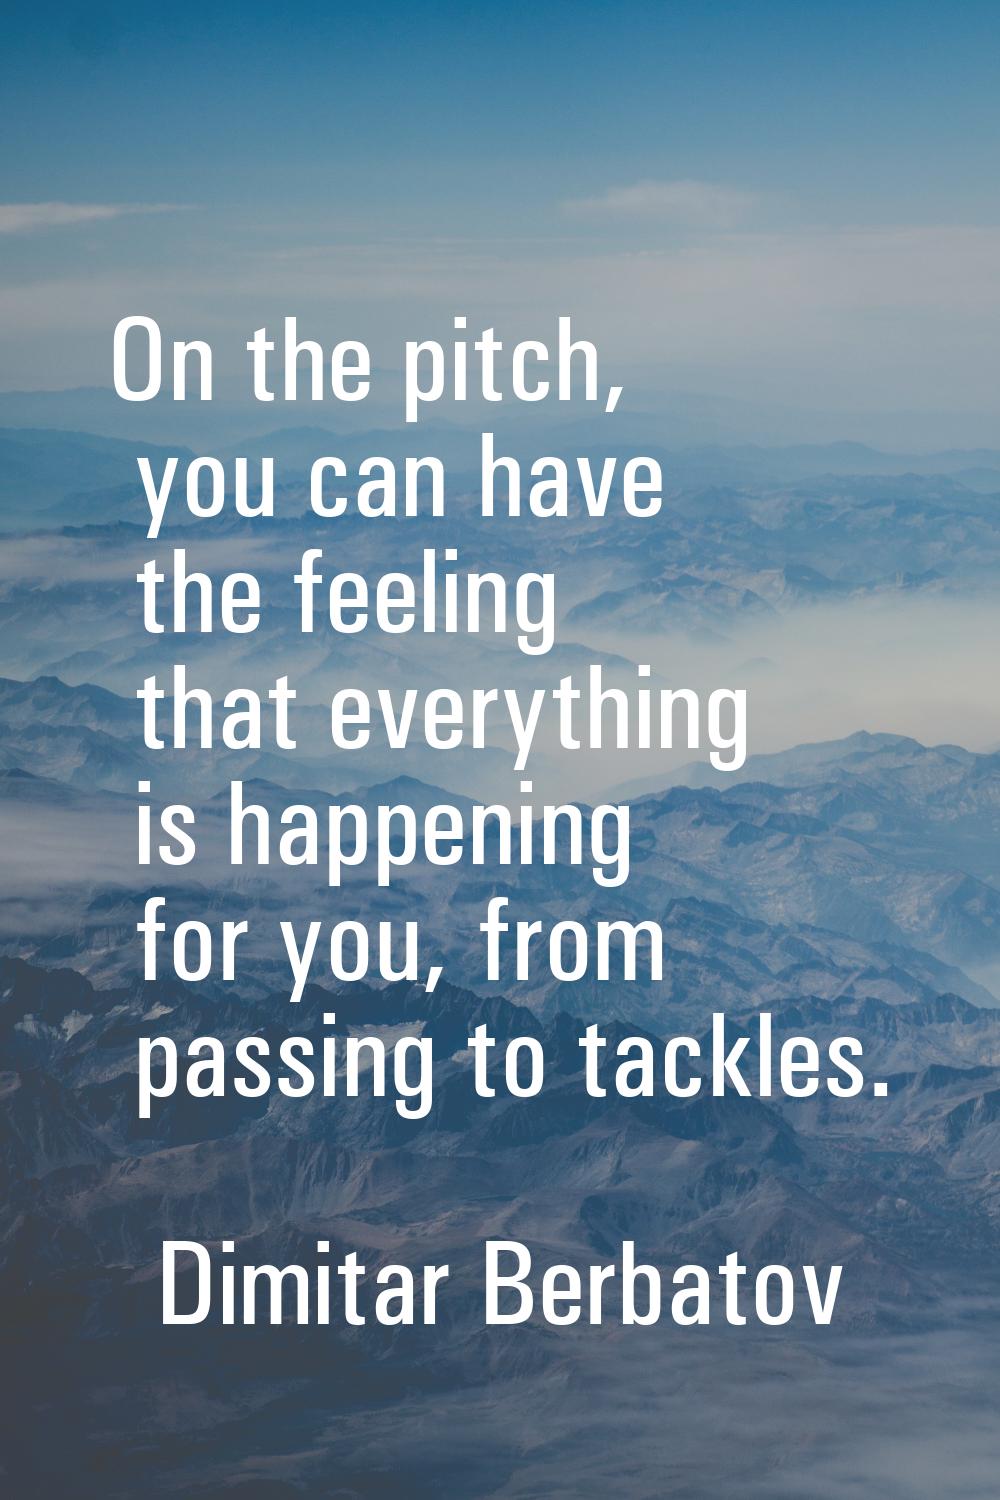 On the pitch, you can have the feeling that everything is happening for you, from passing to tackle